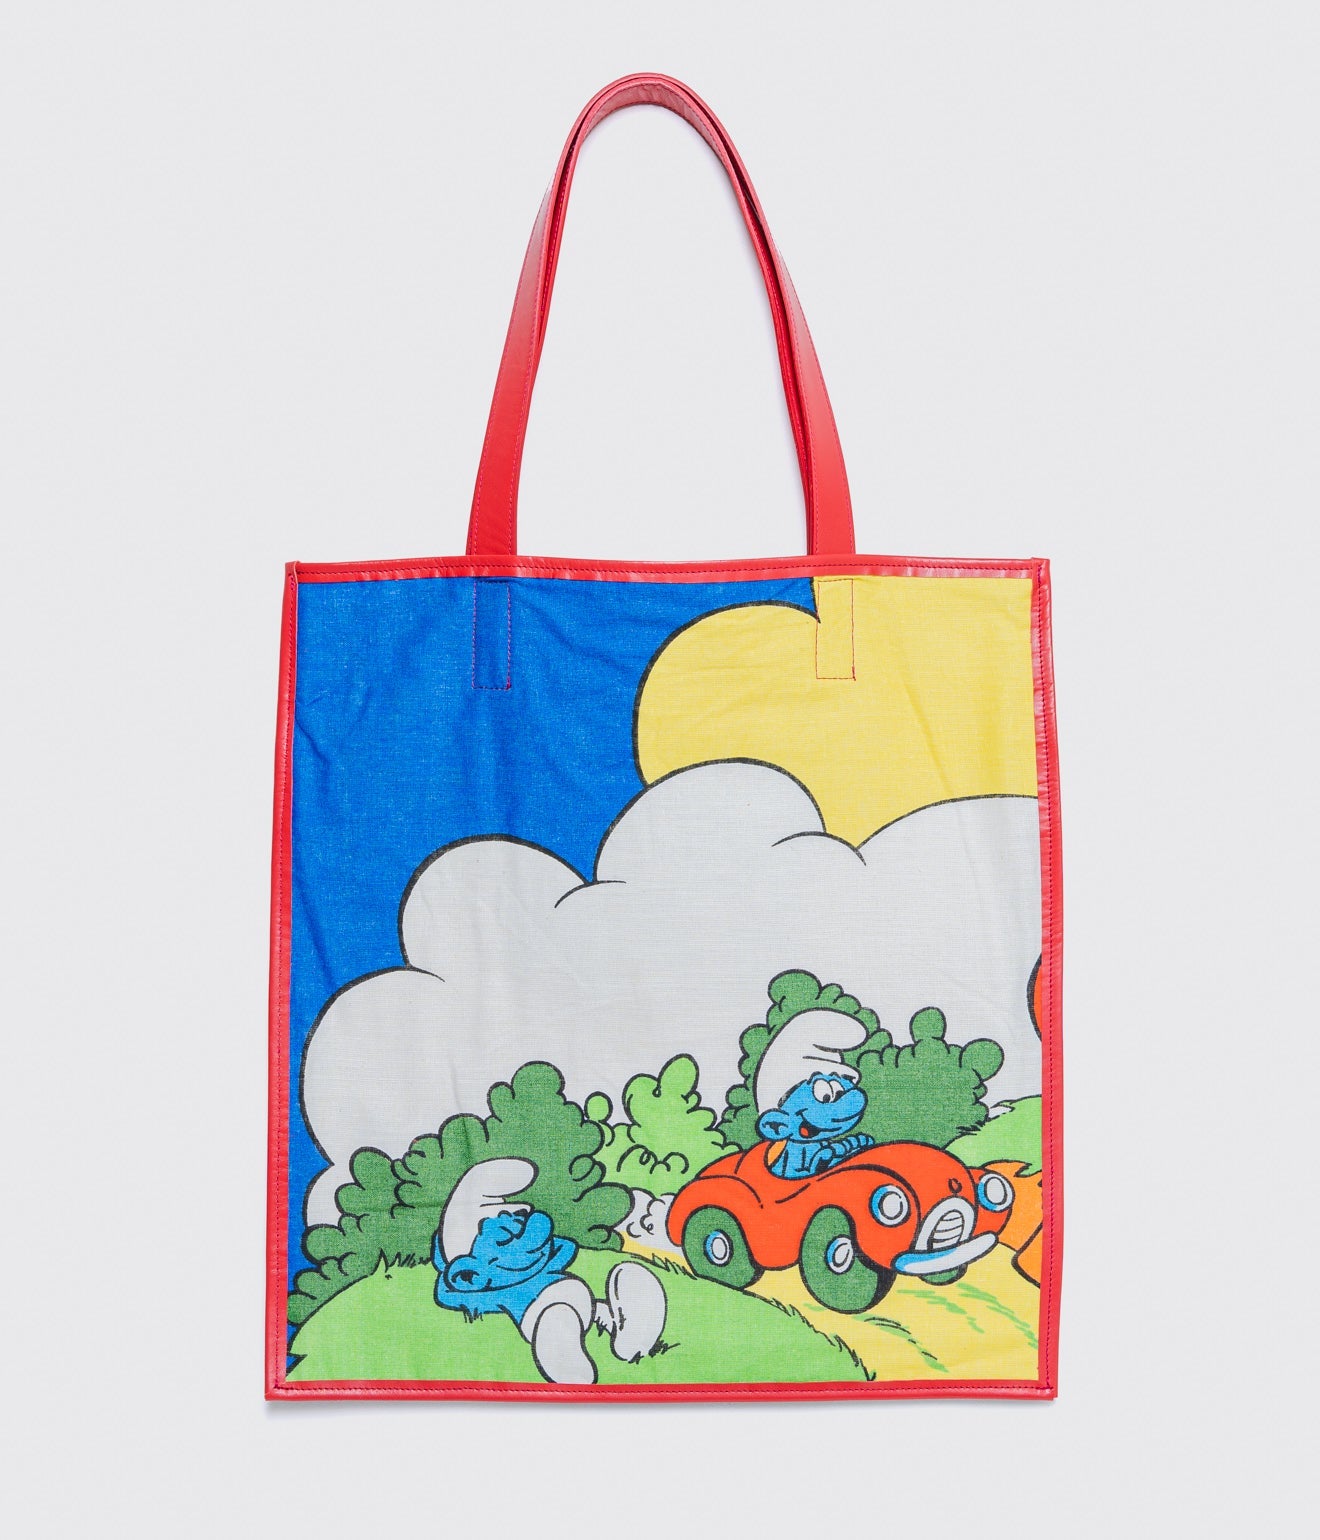 WEAREALLANIMALS UPCYCLE ”Piping Flat Tote -Vintage Smurf Fabric-" #3 - WEAREALLANIMALS